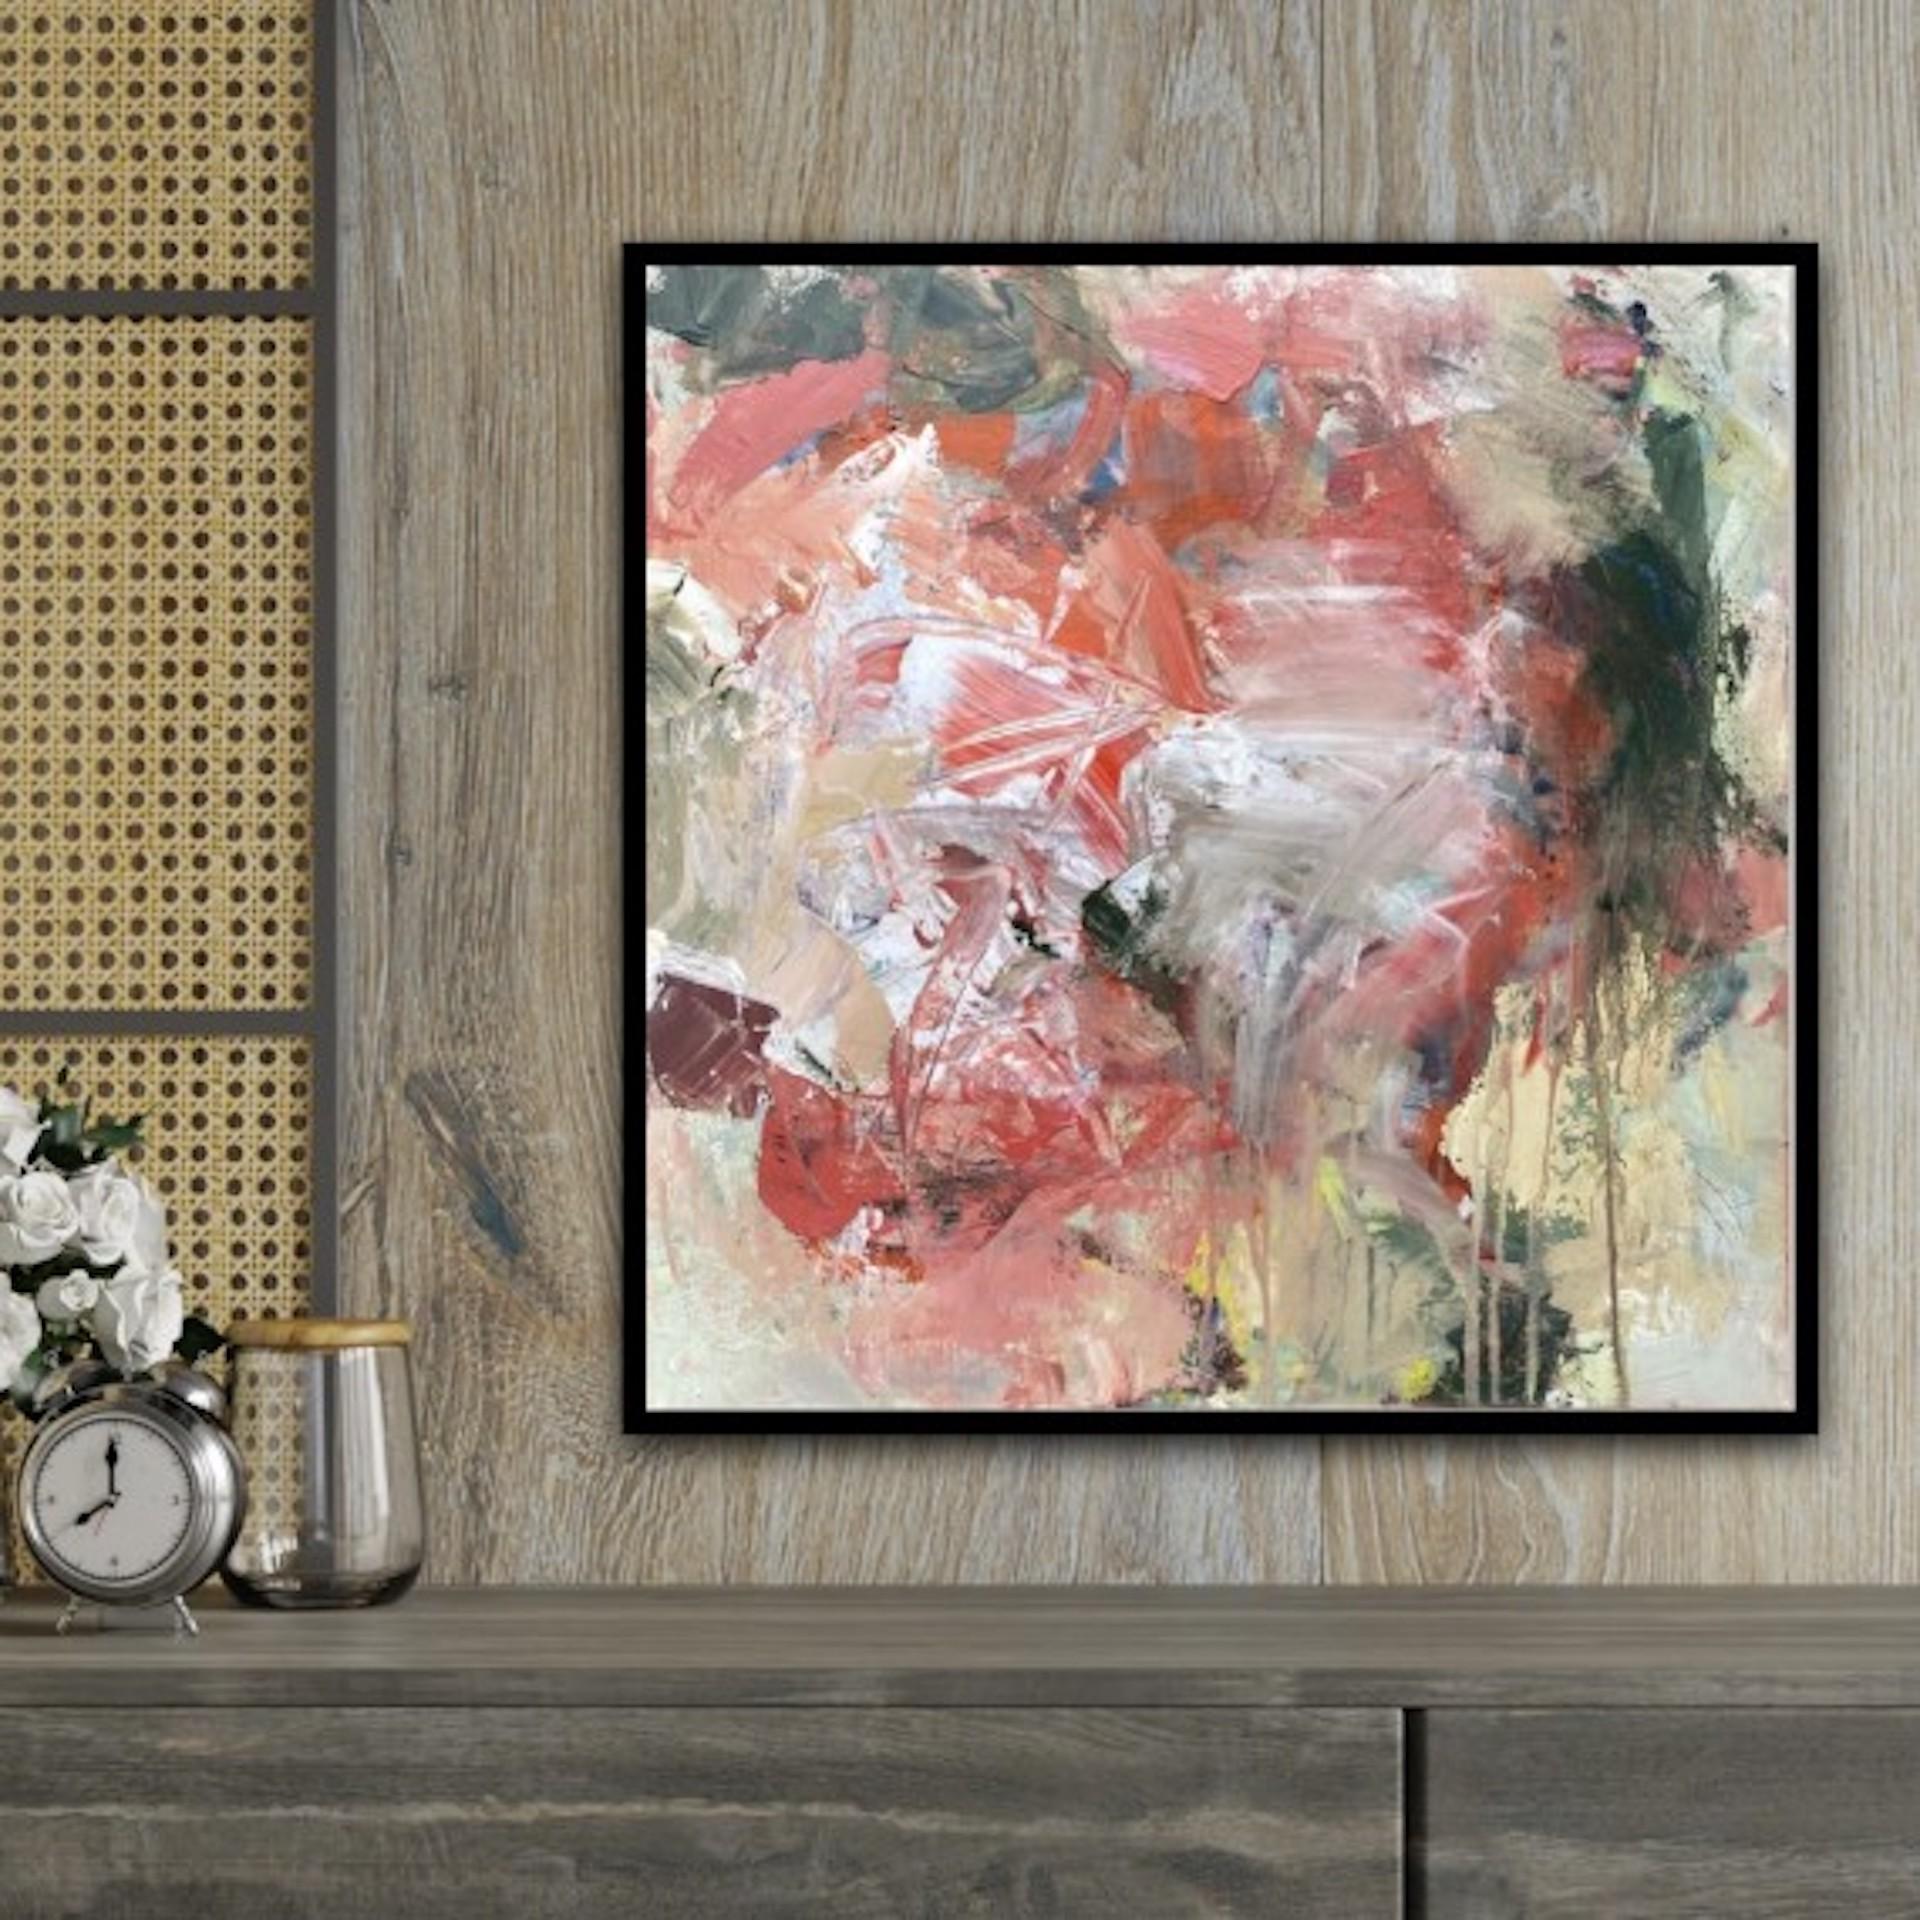 Warm Embrace, Michelle Marra, Original Painting, Abstract Floral Art, Affordable 1